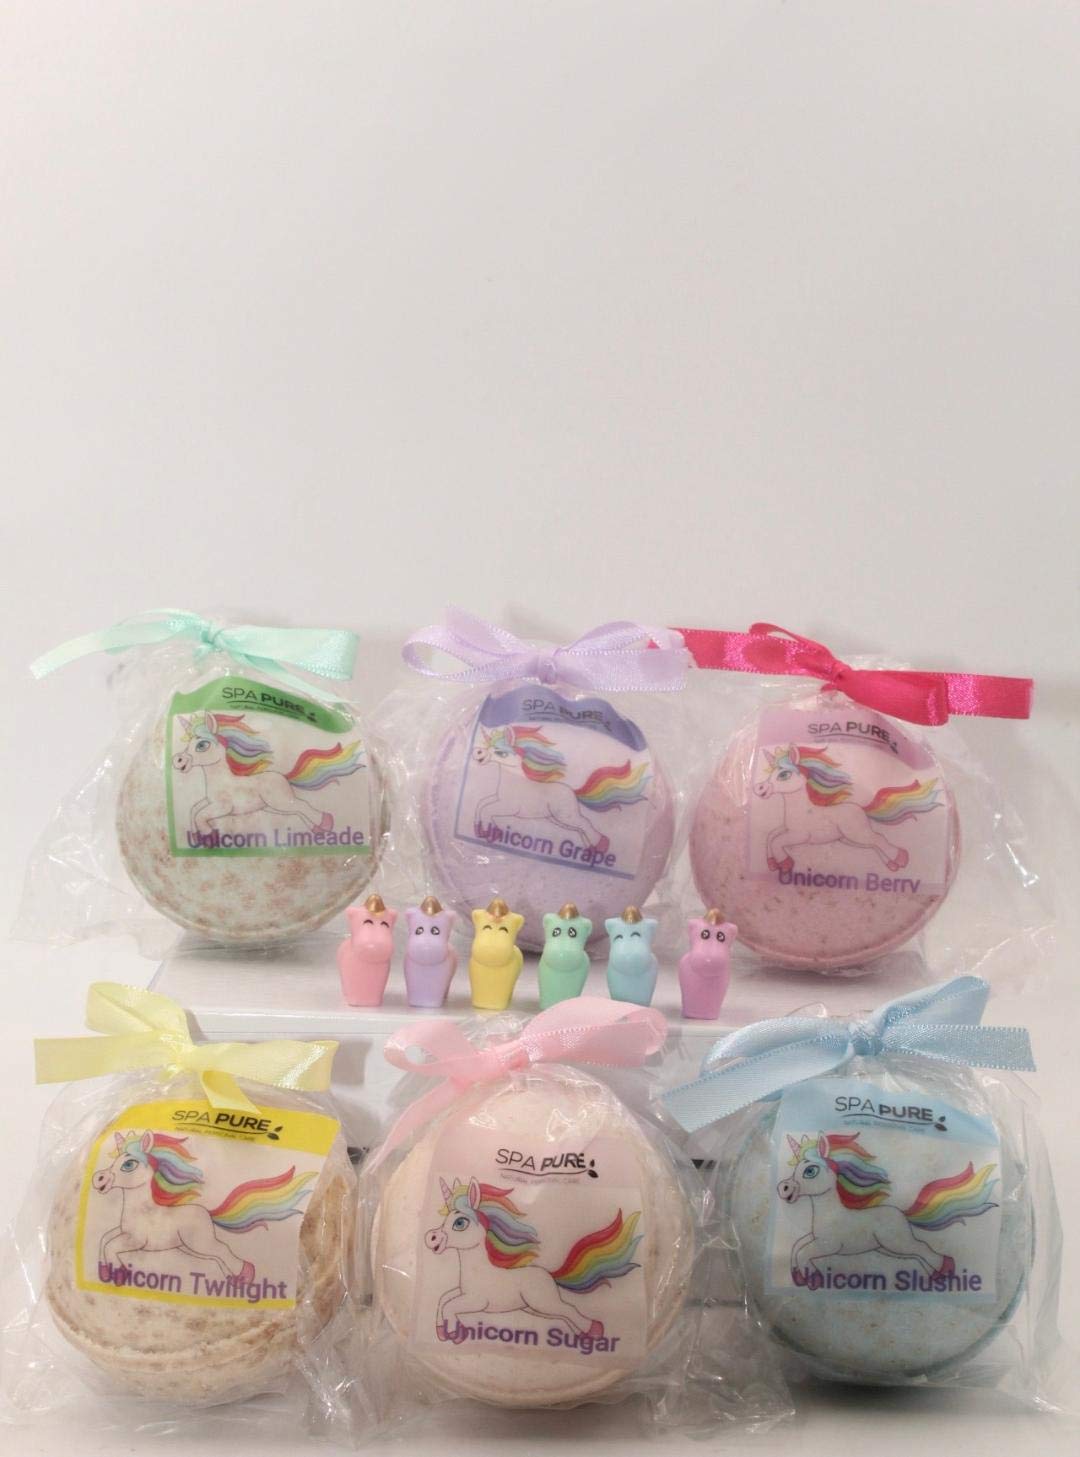 SPAPURE Unicorns and Rainbows - Bath Bomb Gift Set with 6 XL Unicorn bath bombs with surprise unicorns inside, USA Made, Handmade, Natural Bath Bombs, Birthday Gift idea for Kids (6 Count) Pack of 1